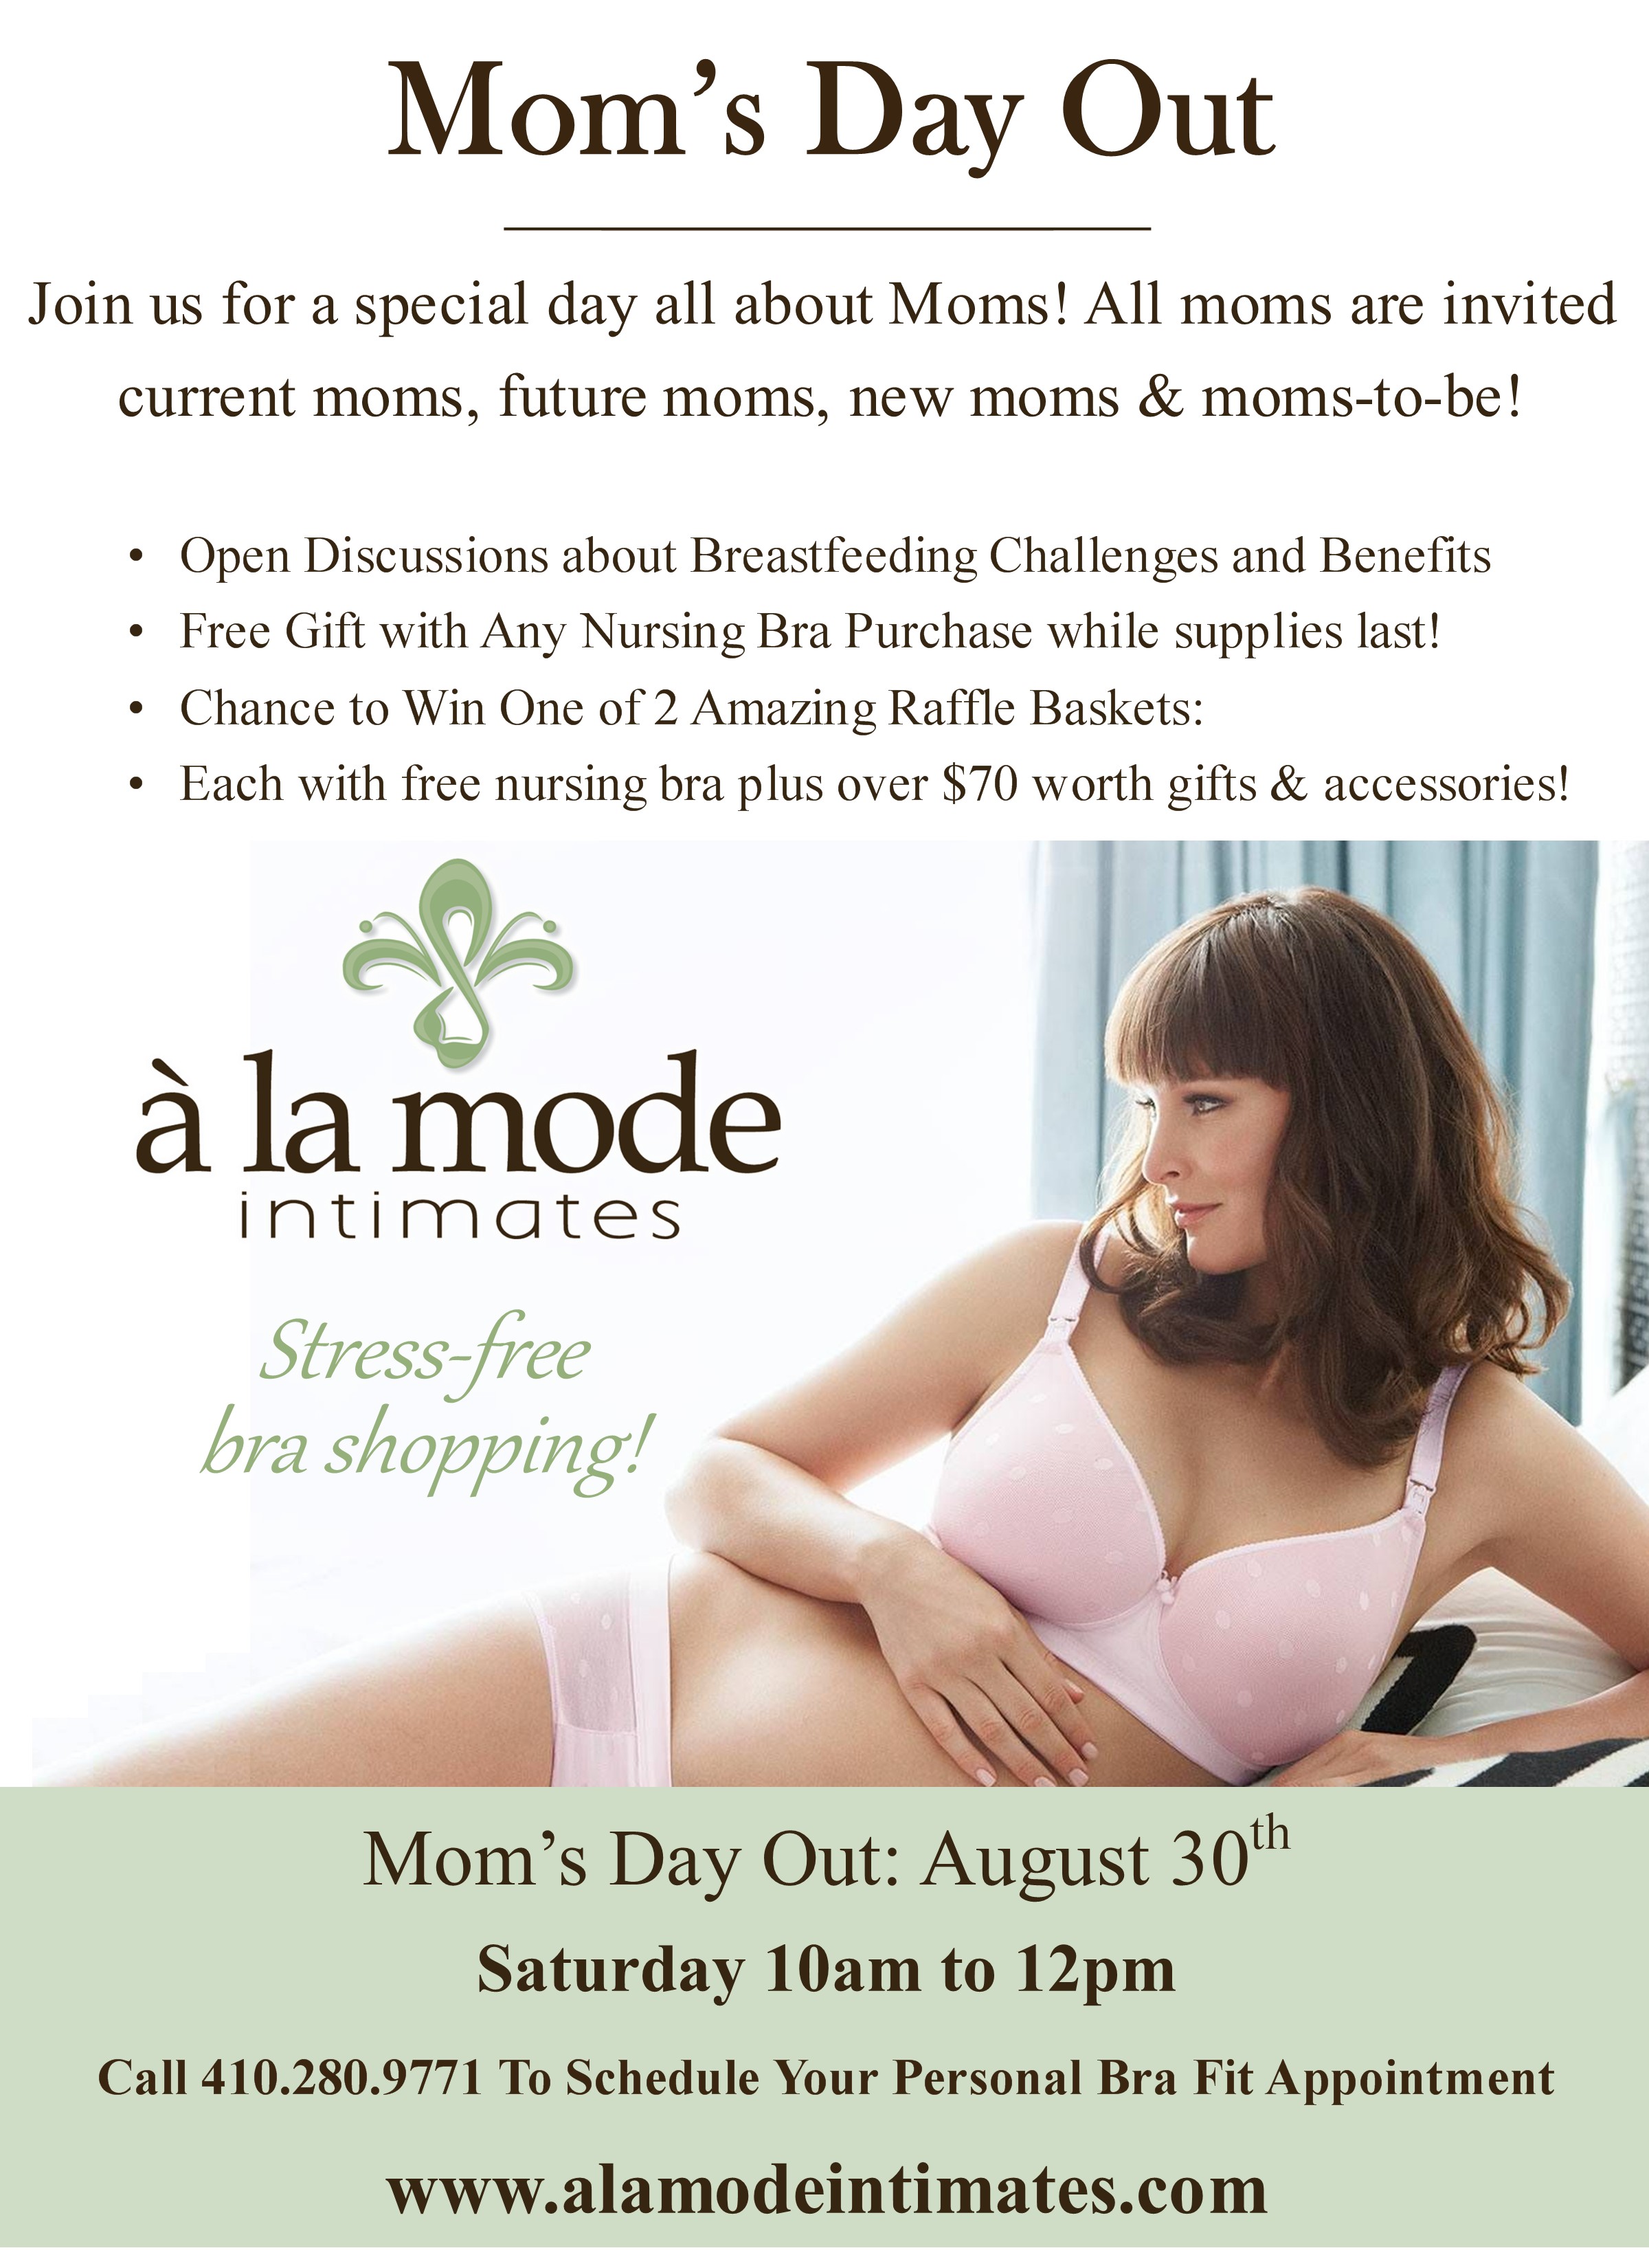 Moms Day Out Event Lactation Nursing Breastfeeding Health